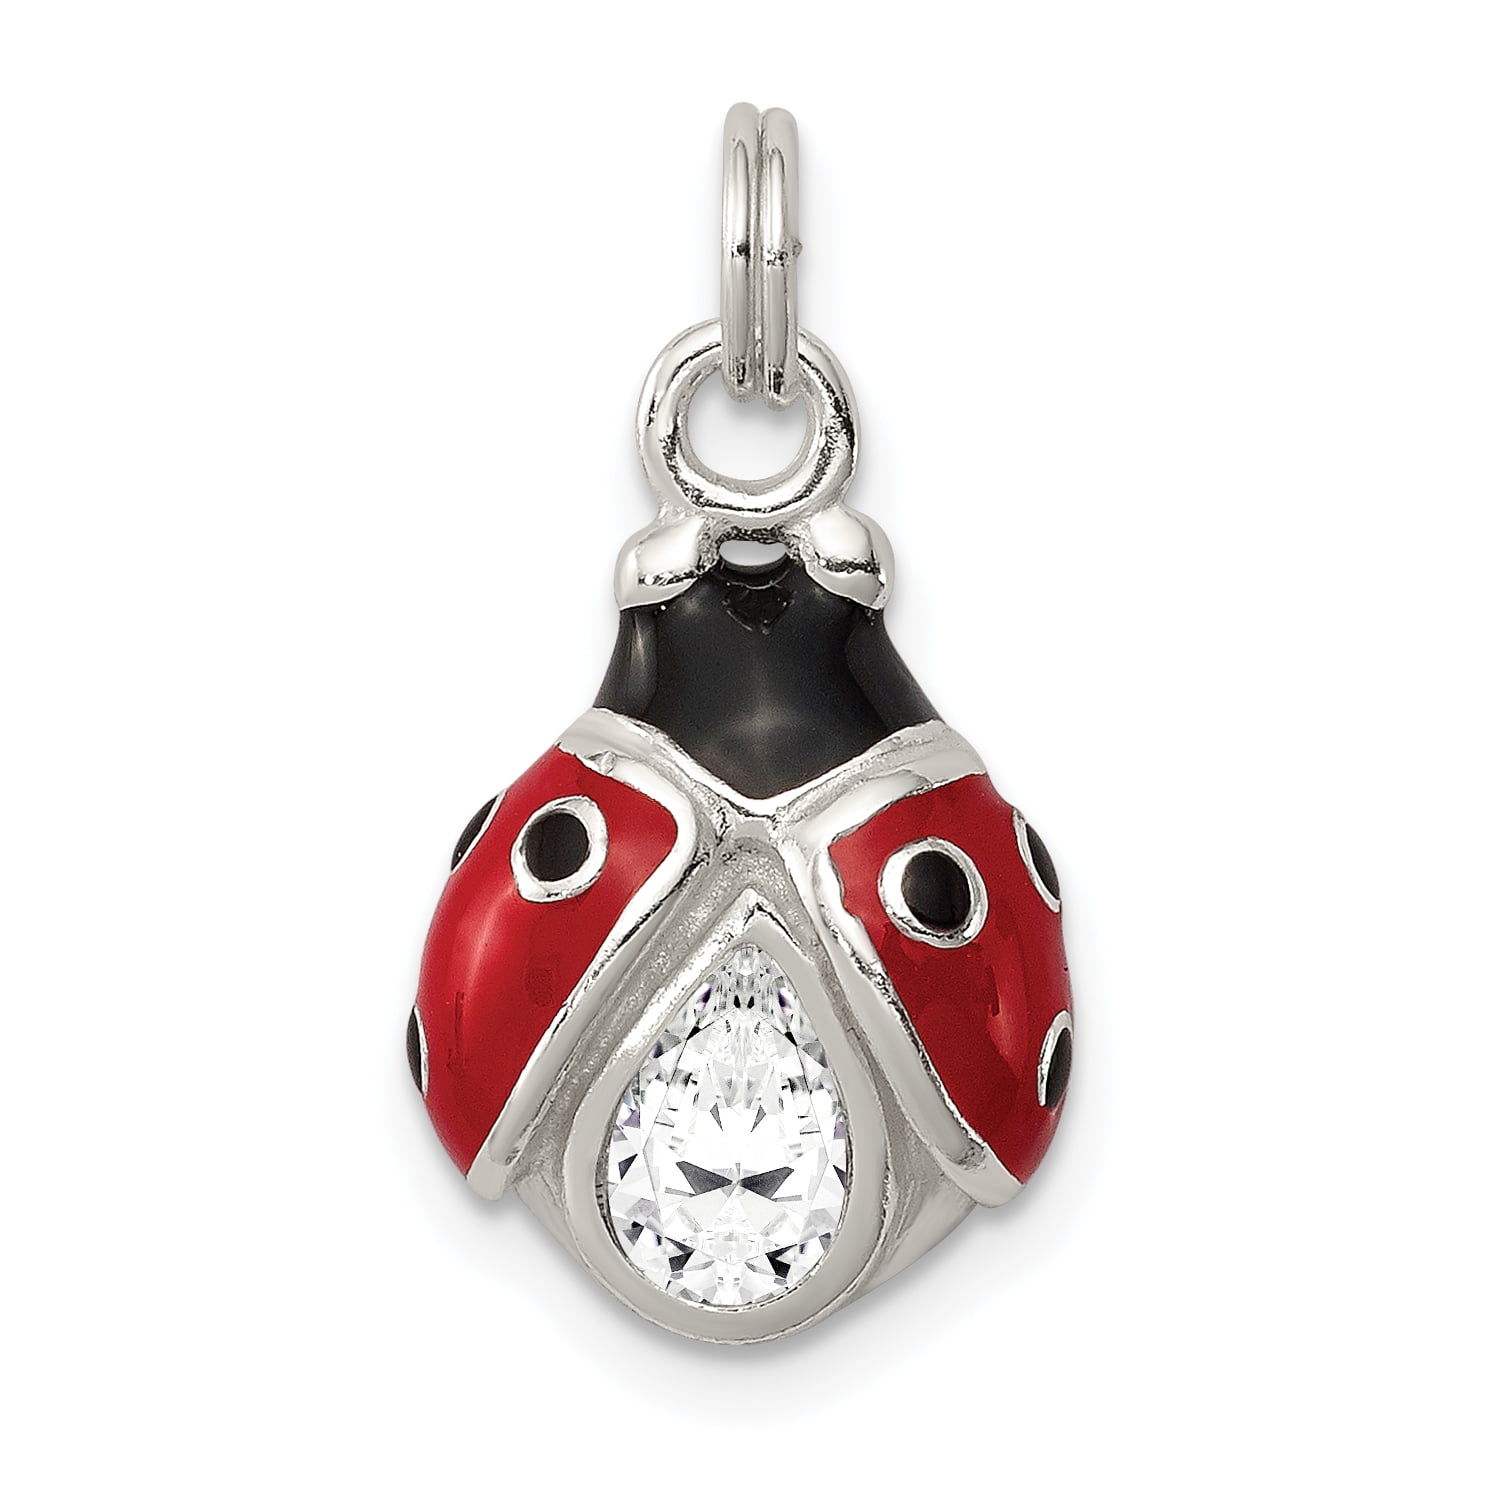 20mm x 10mm Solid 925 Sterling Silver Pendant Cubic Zirconia CZ Black & Red Enameled Polished Lady Bug Charm 